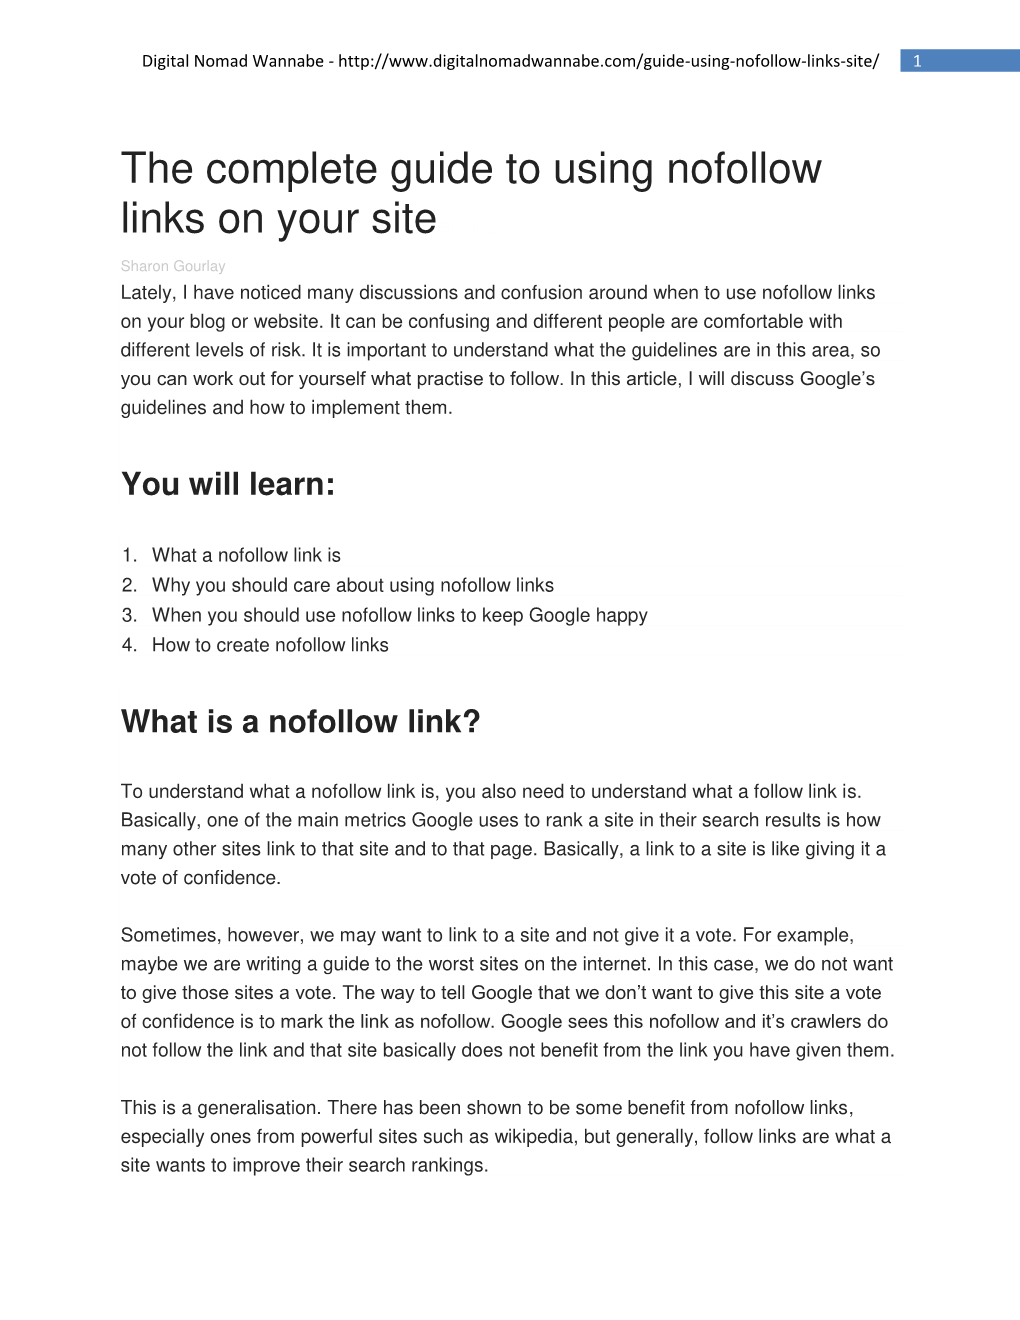 When Should You Use Nofollow Links?